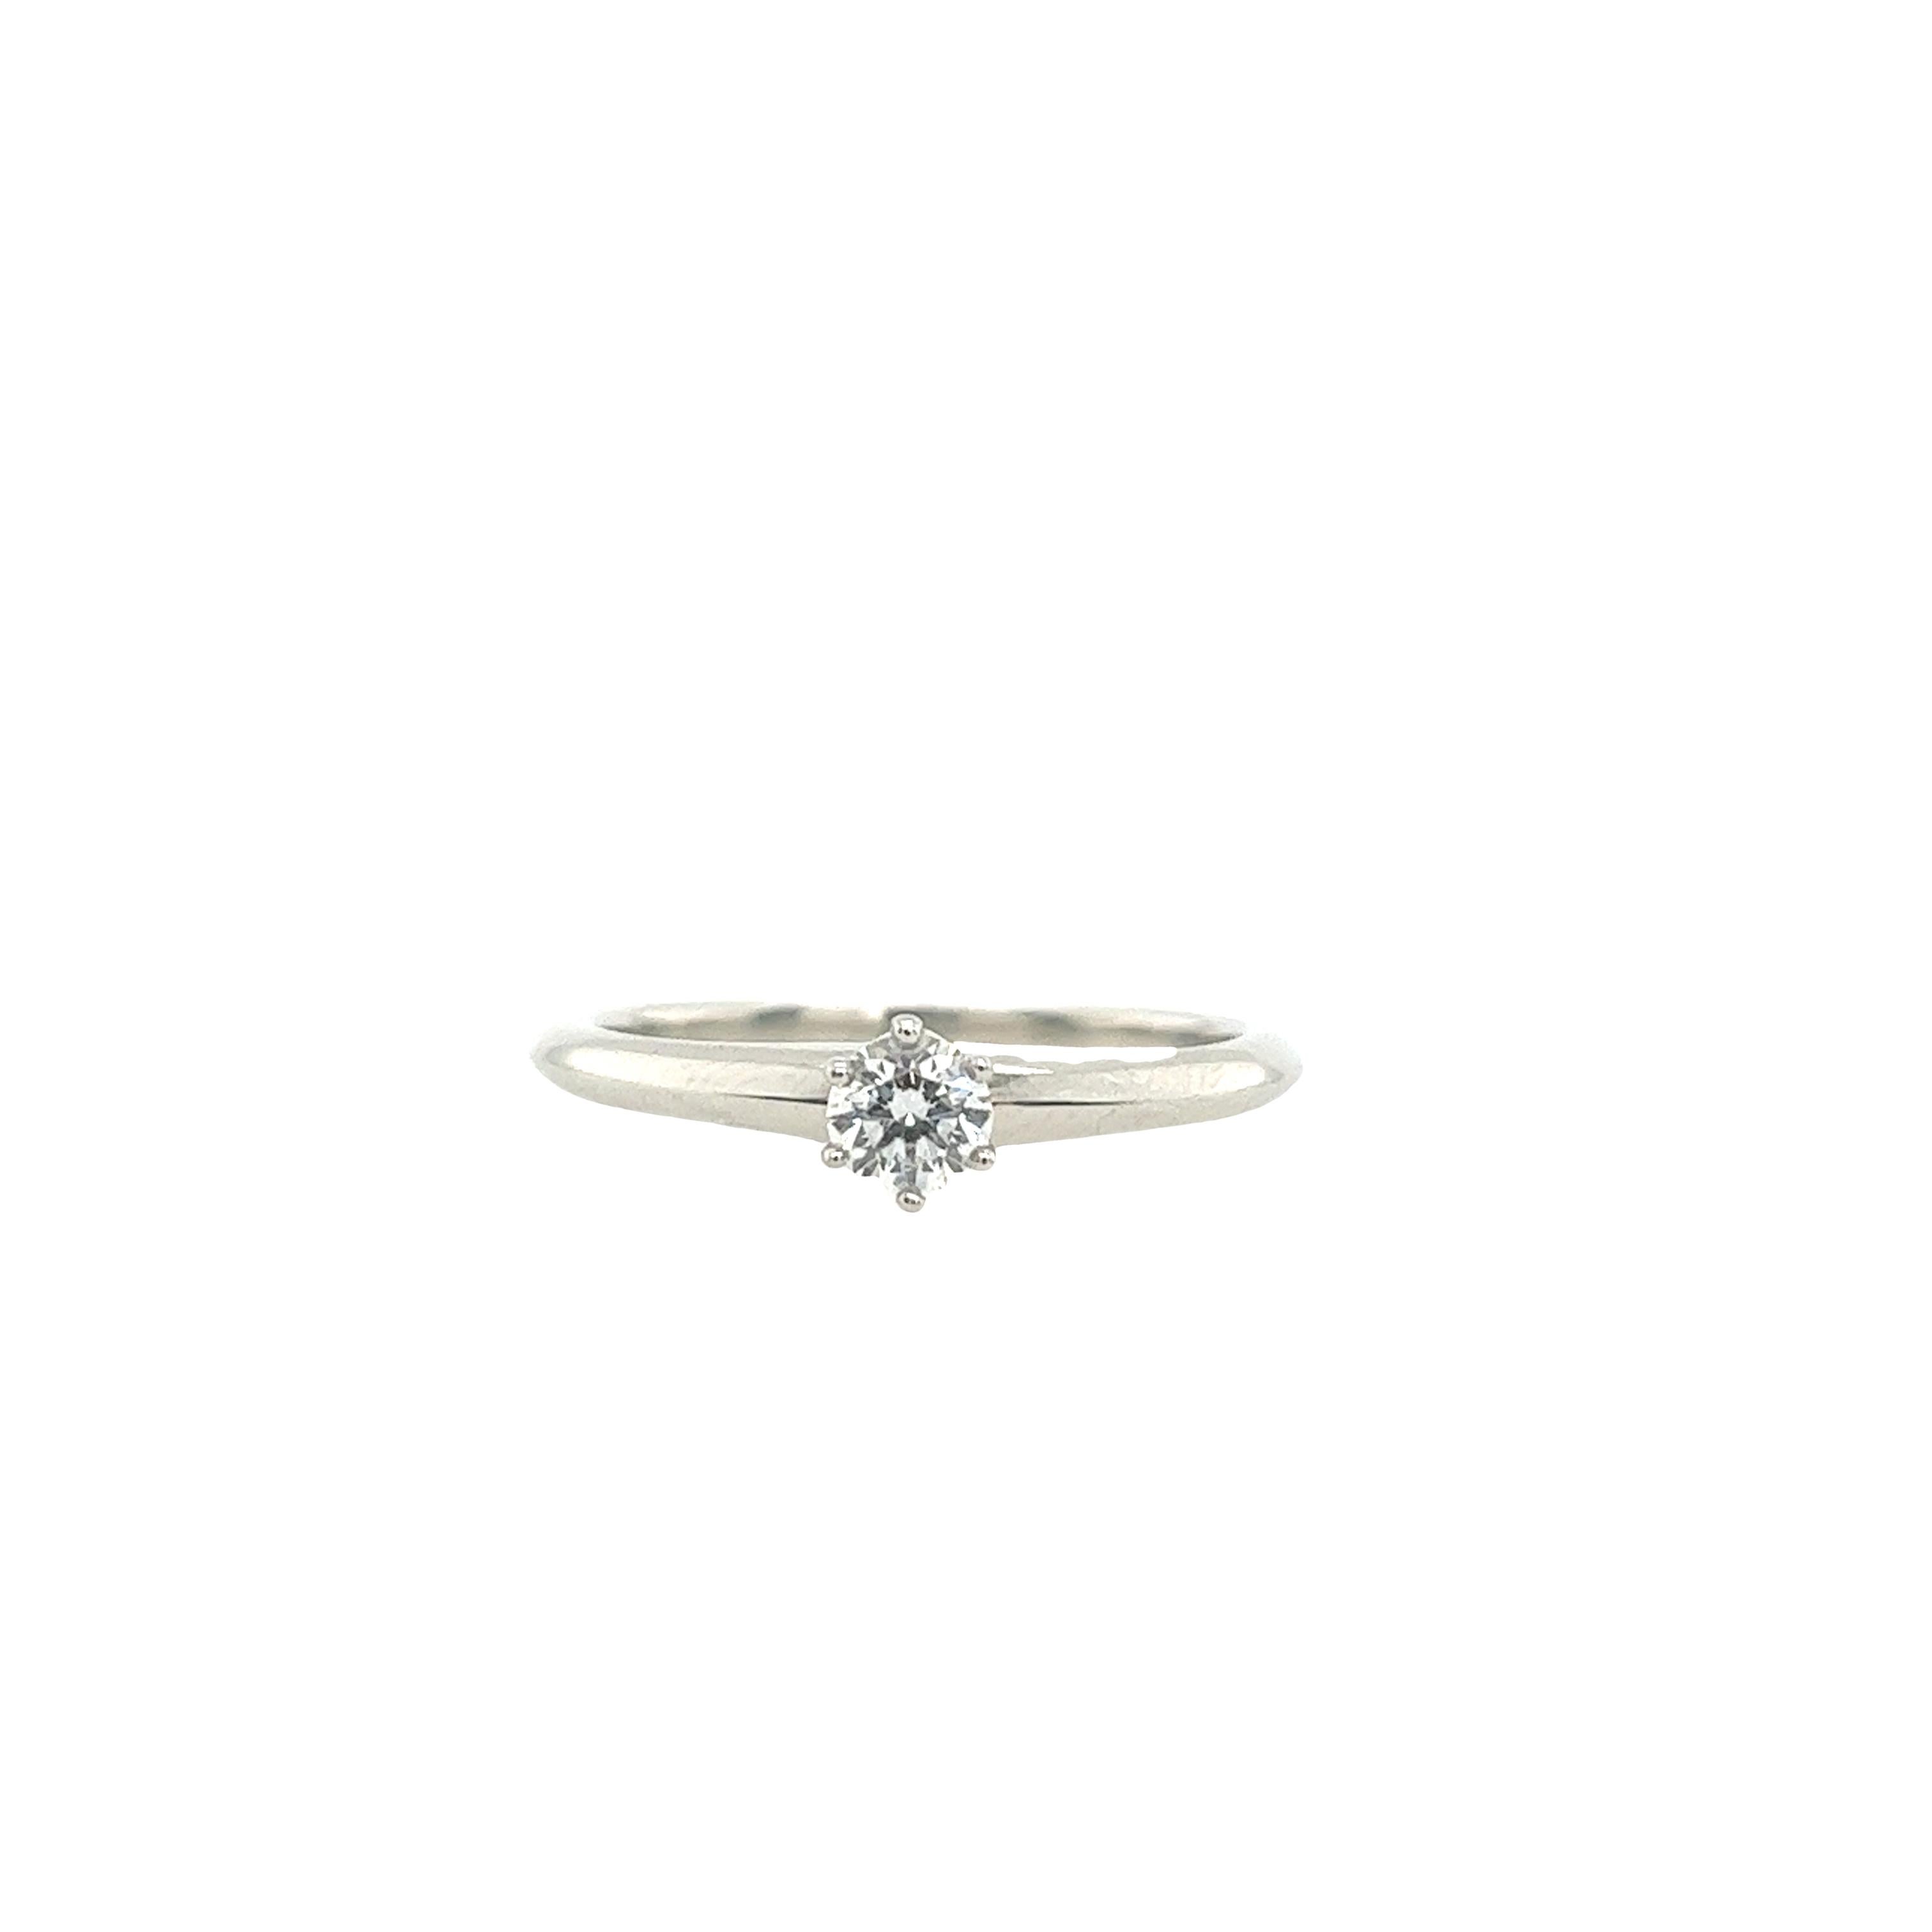 Tiffany & Co. Platinum Solitaire Diamond Engagement Ring set with 0.24ct Diamond For Sale